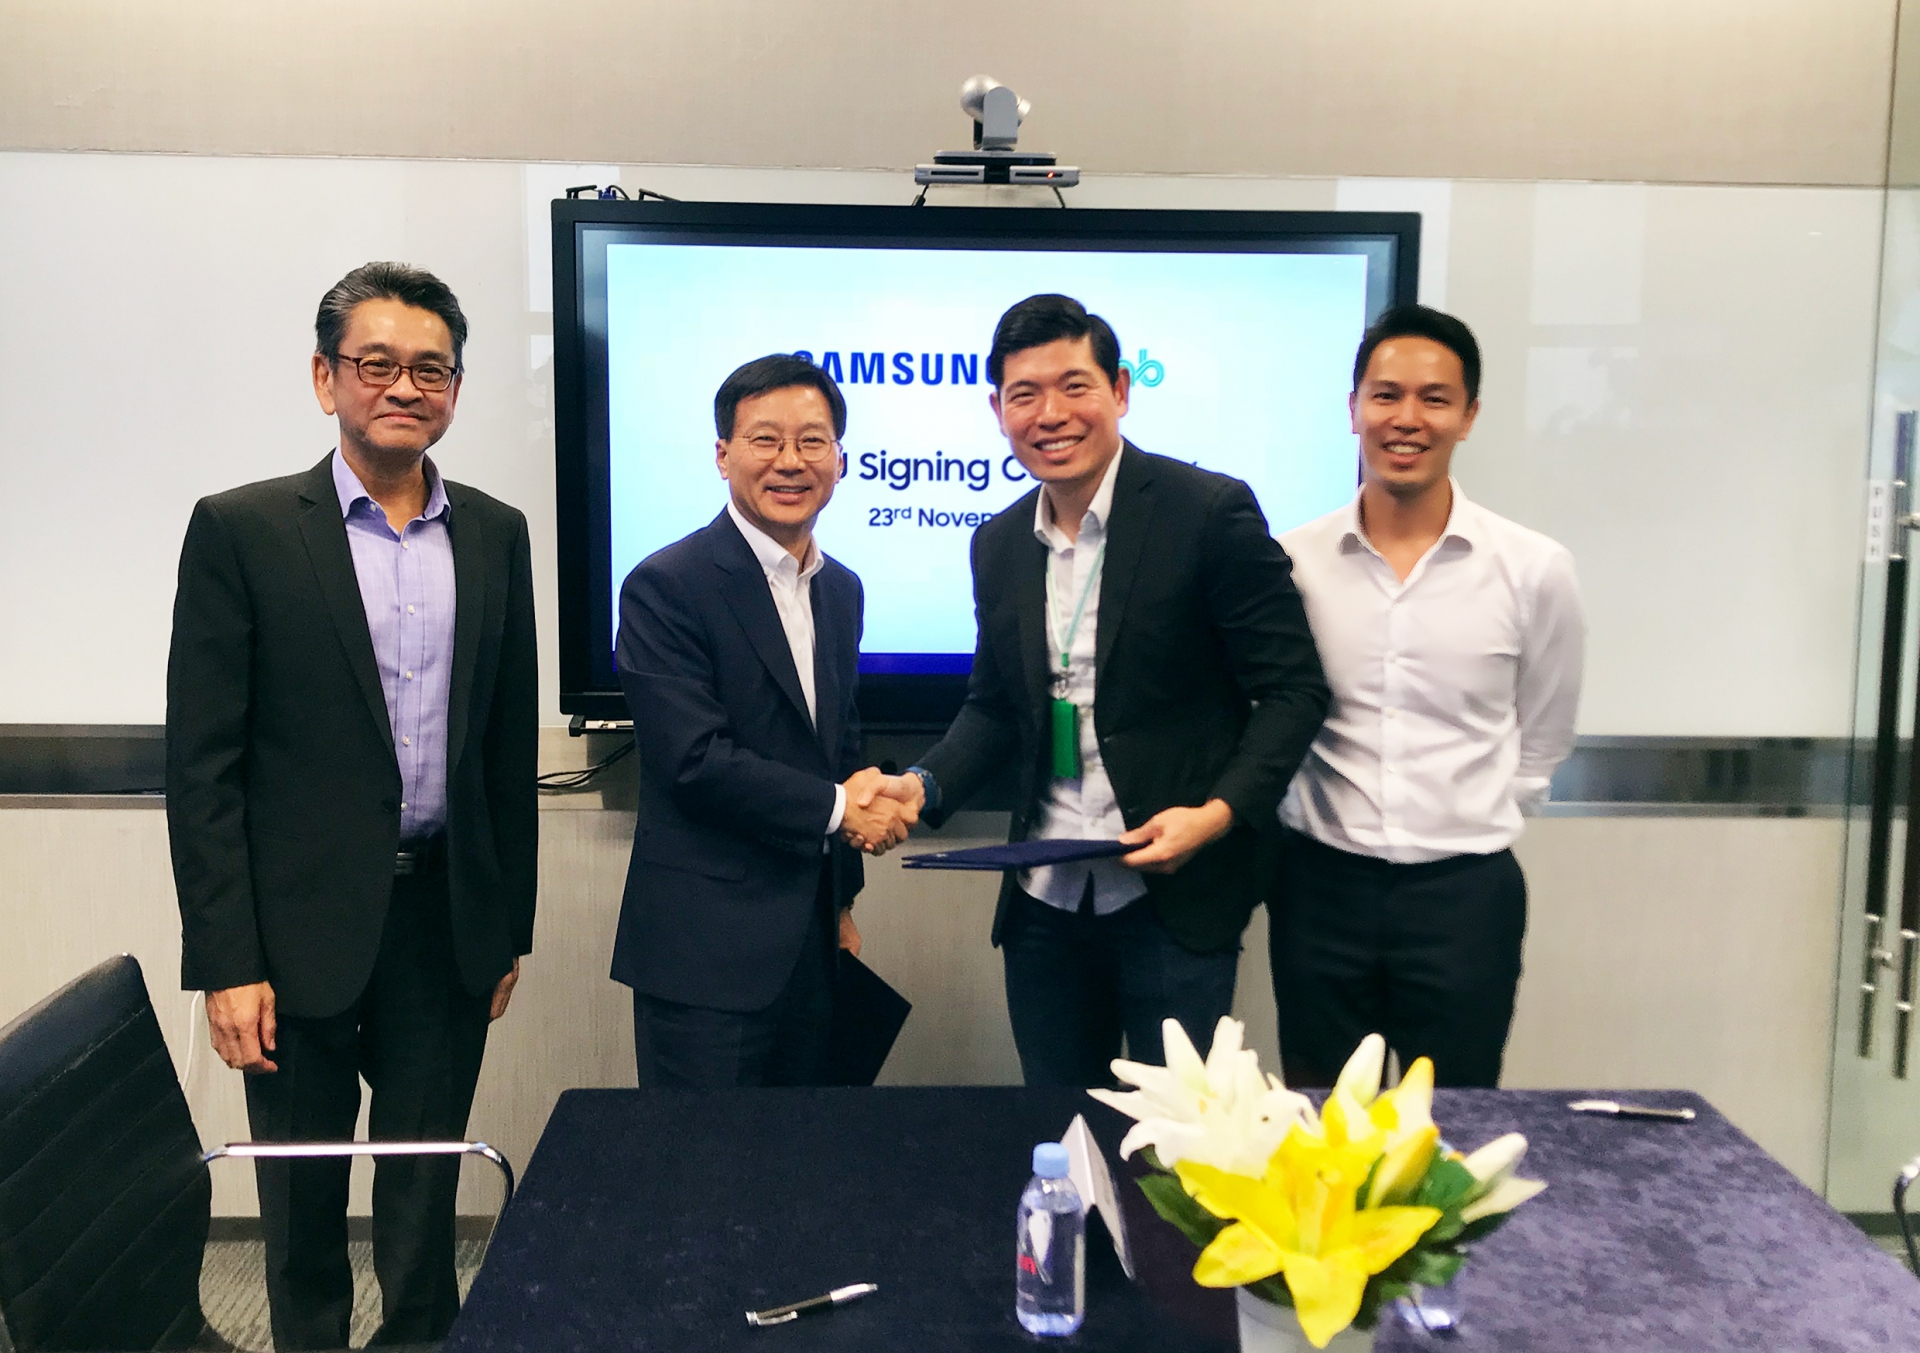 Grab and Samsung sign MOU to drive digital inclusion in Southeast Asia